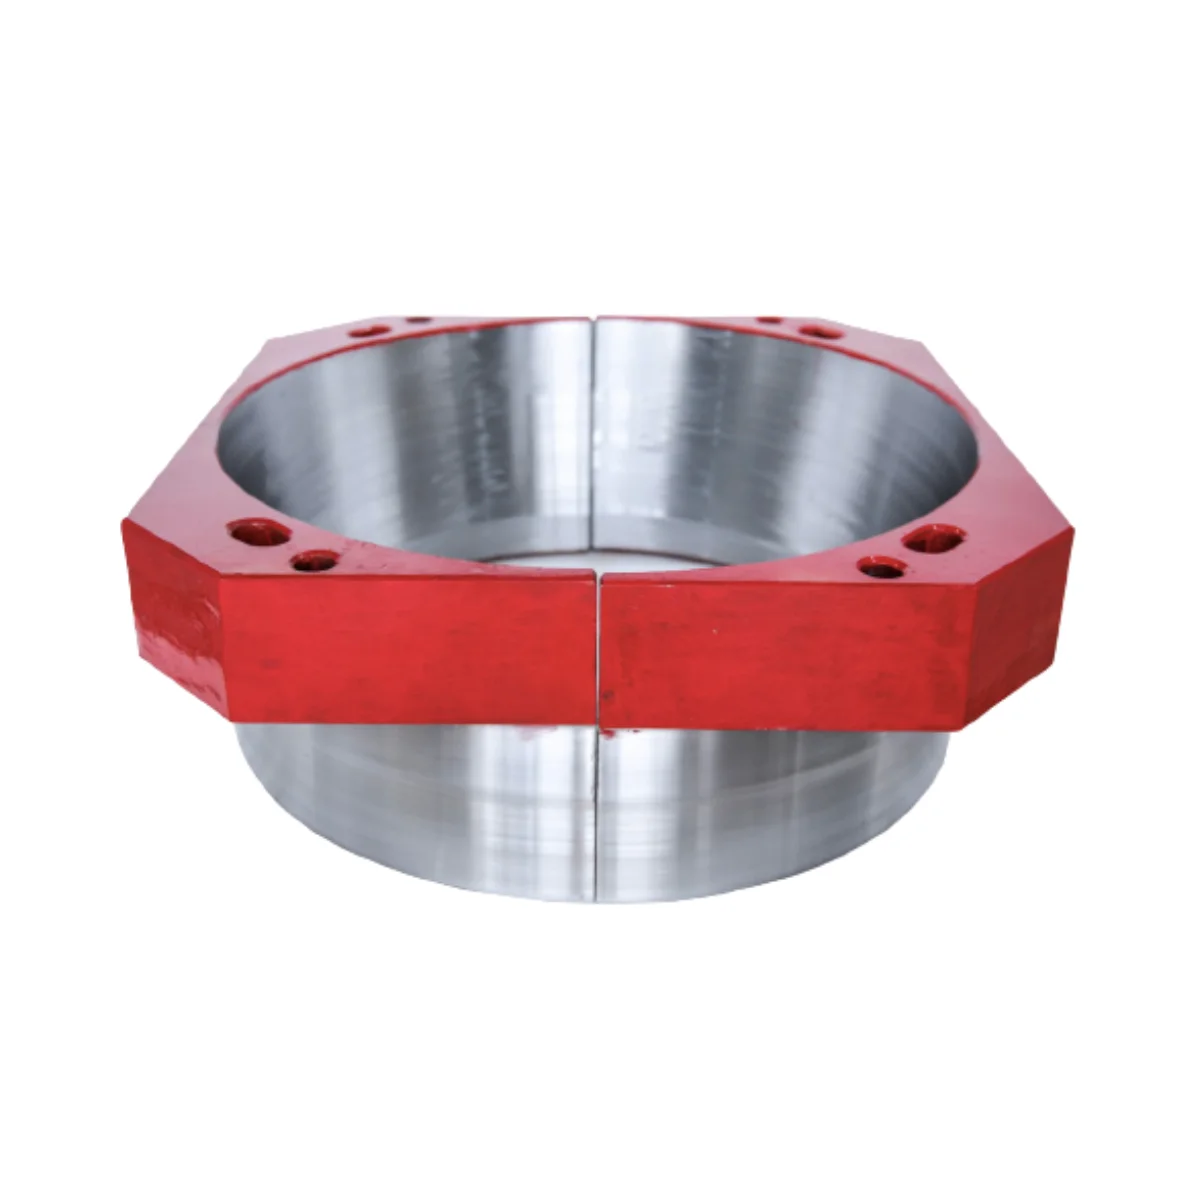 Round casing bushings for oilfield tools, with equivalents from NOV, Varco, DenCon, Forum, Bvm, Bv, and Rutong, ensure stable drilling operations.